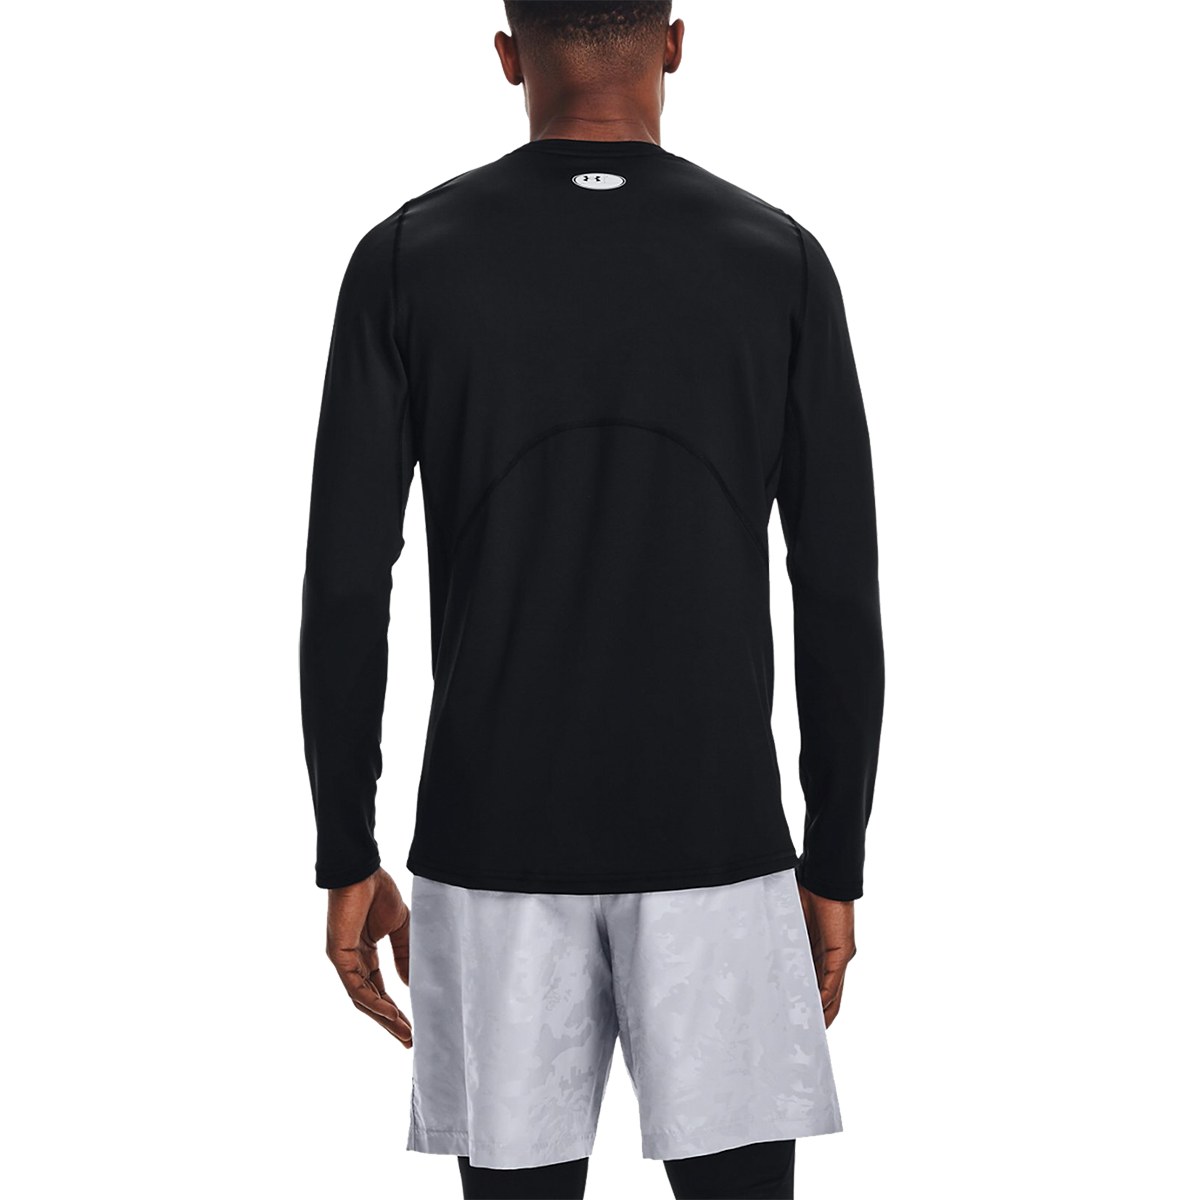 Men's Fitted ColdGear Crew alternate view